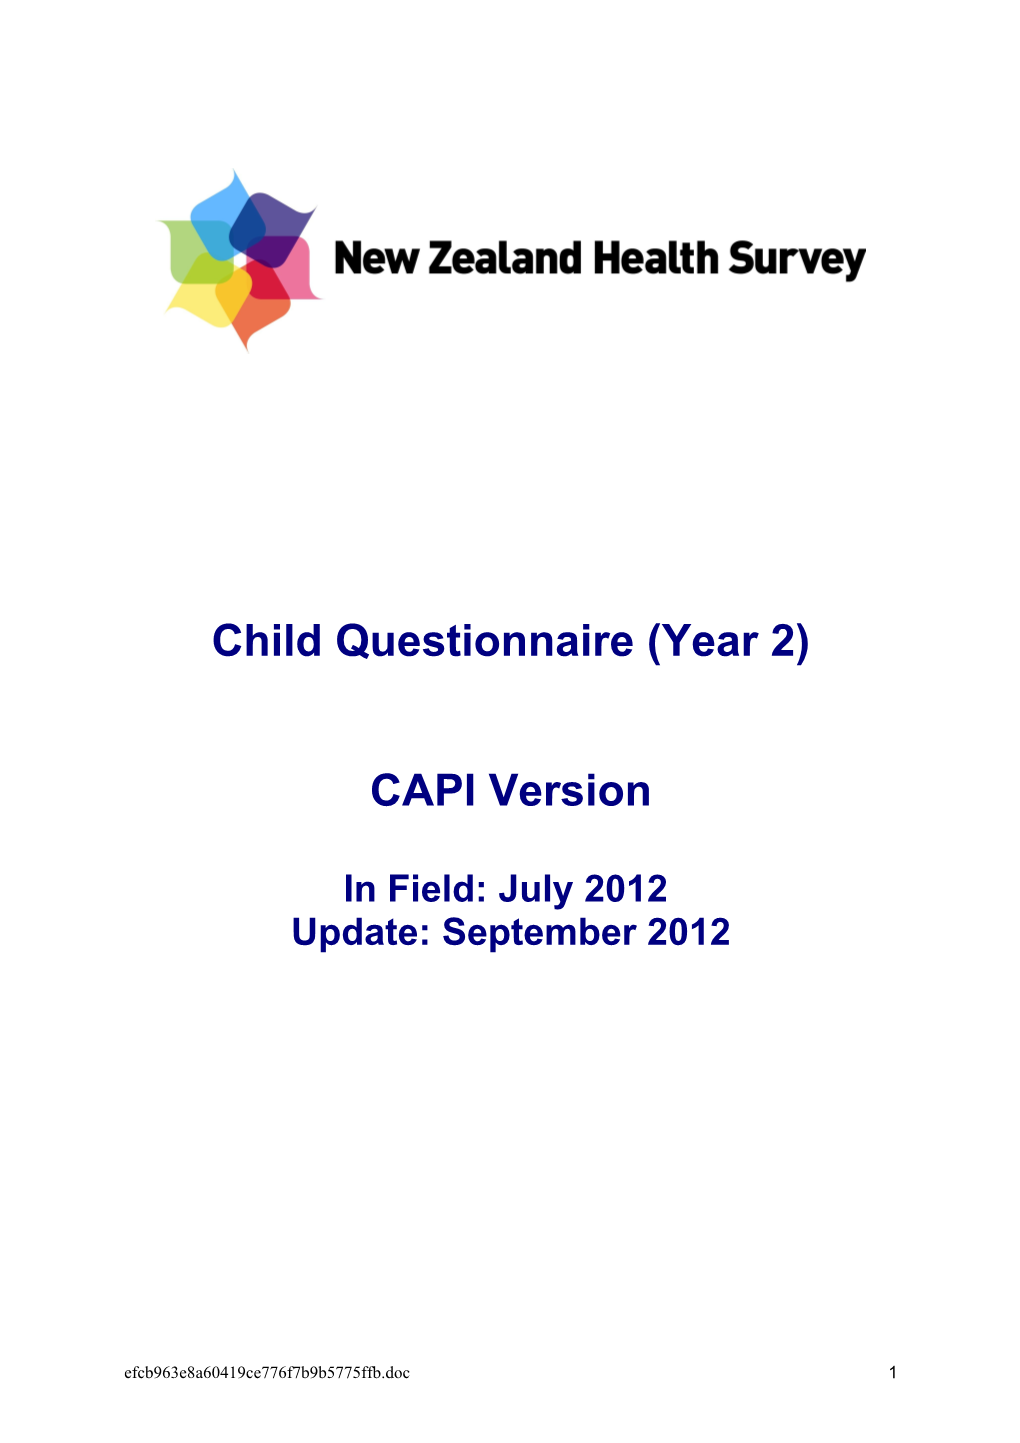 NZHS - Child Questionnaire (Year 2)